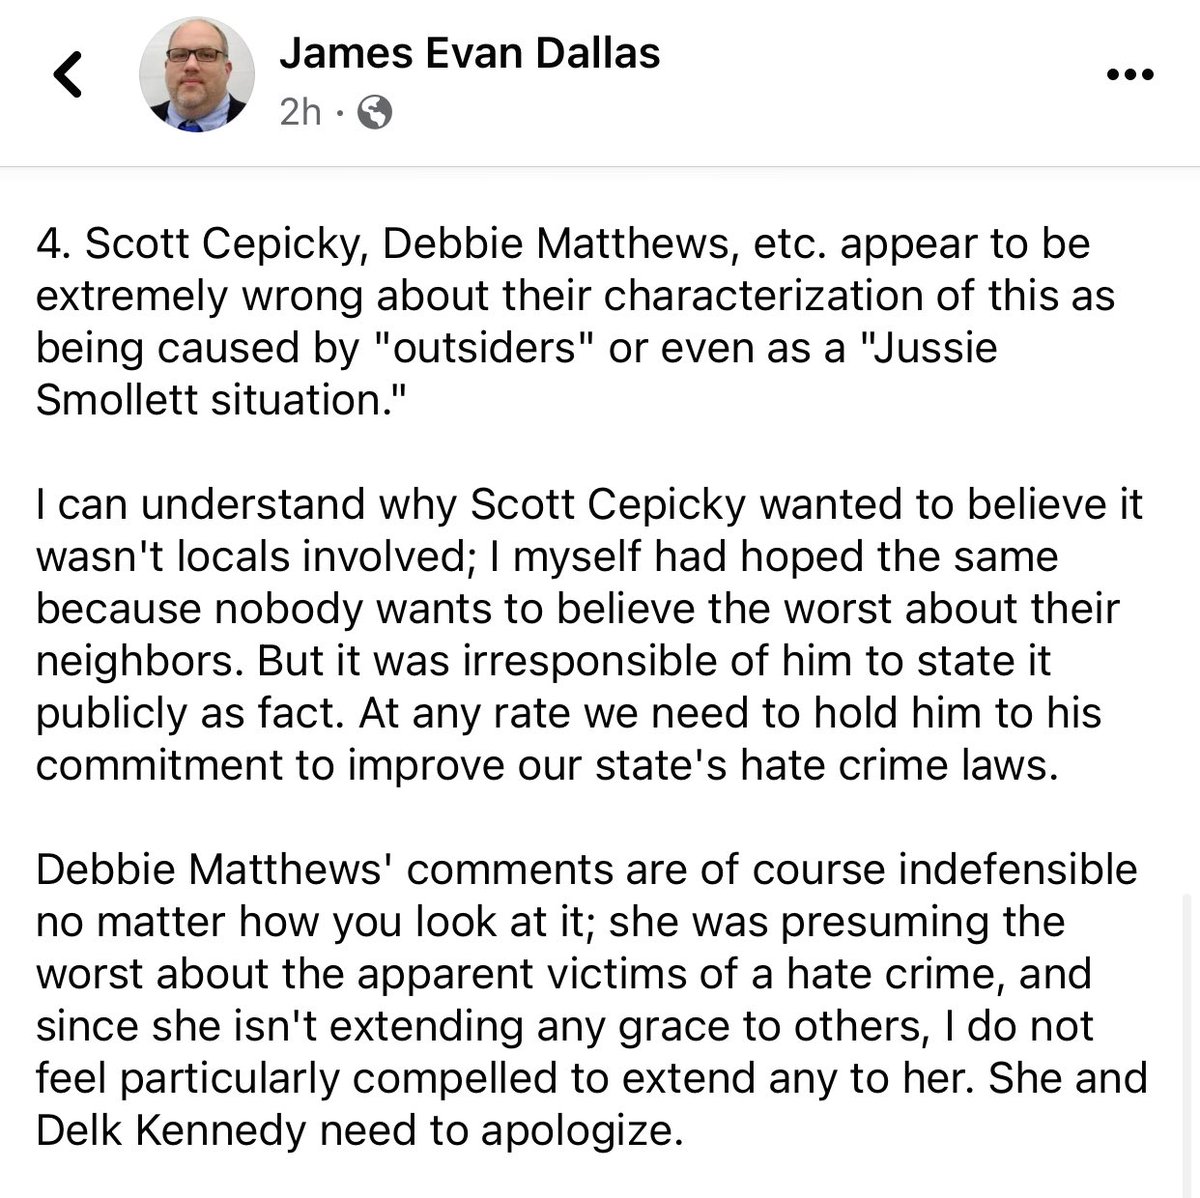 James Dallas, @MauryCountyDems chair, calls for an apology from former MAURY COUNTY GOP chair Debbie Matthews who called the KKK fliers a “Jussie Smollett Situation”, and @WKOMWKRM host Delk Kennedy for letting it happen (and calling KJP “Buckwheat”) 
https://t.co/4bd2qDccfy https://t.co/lmWF2XapP6